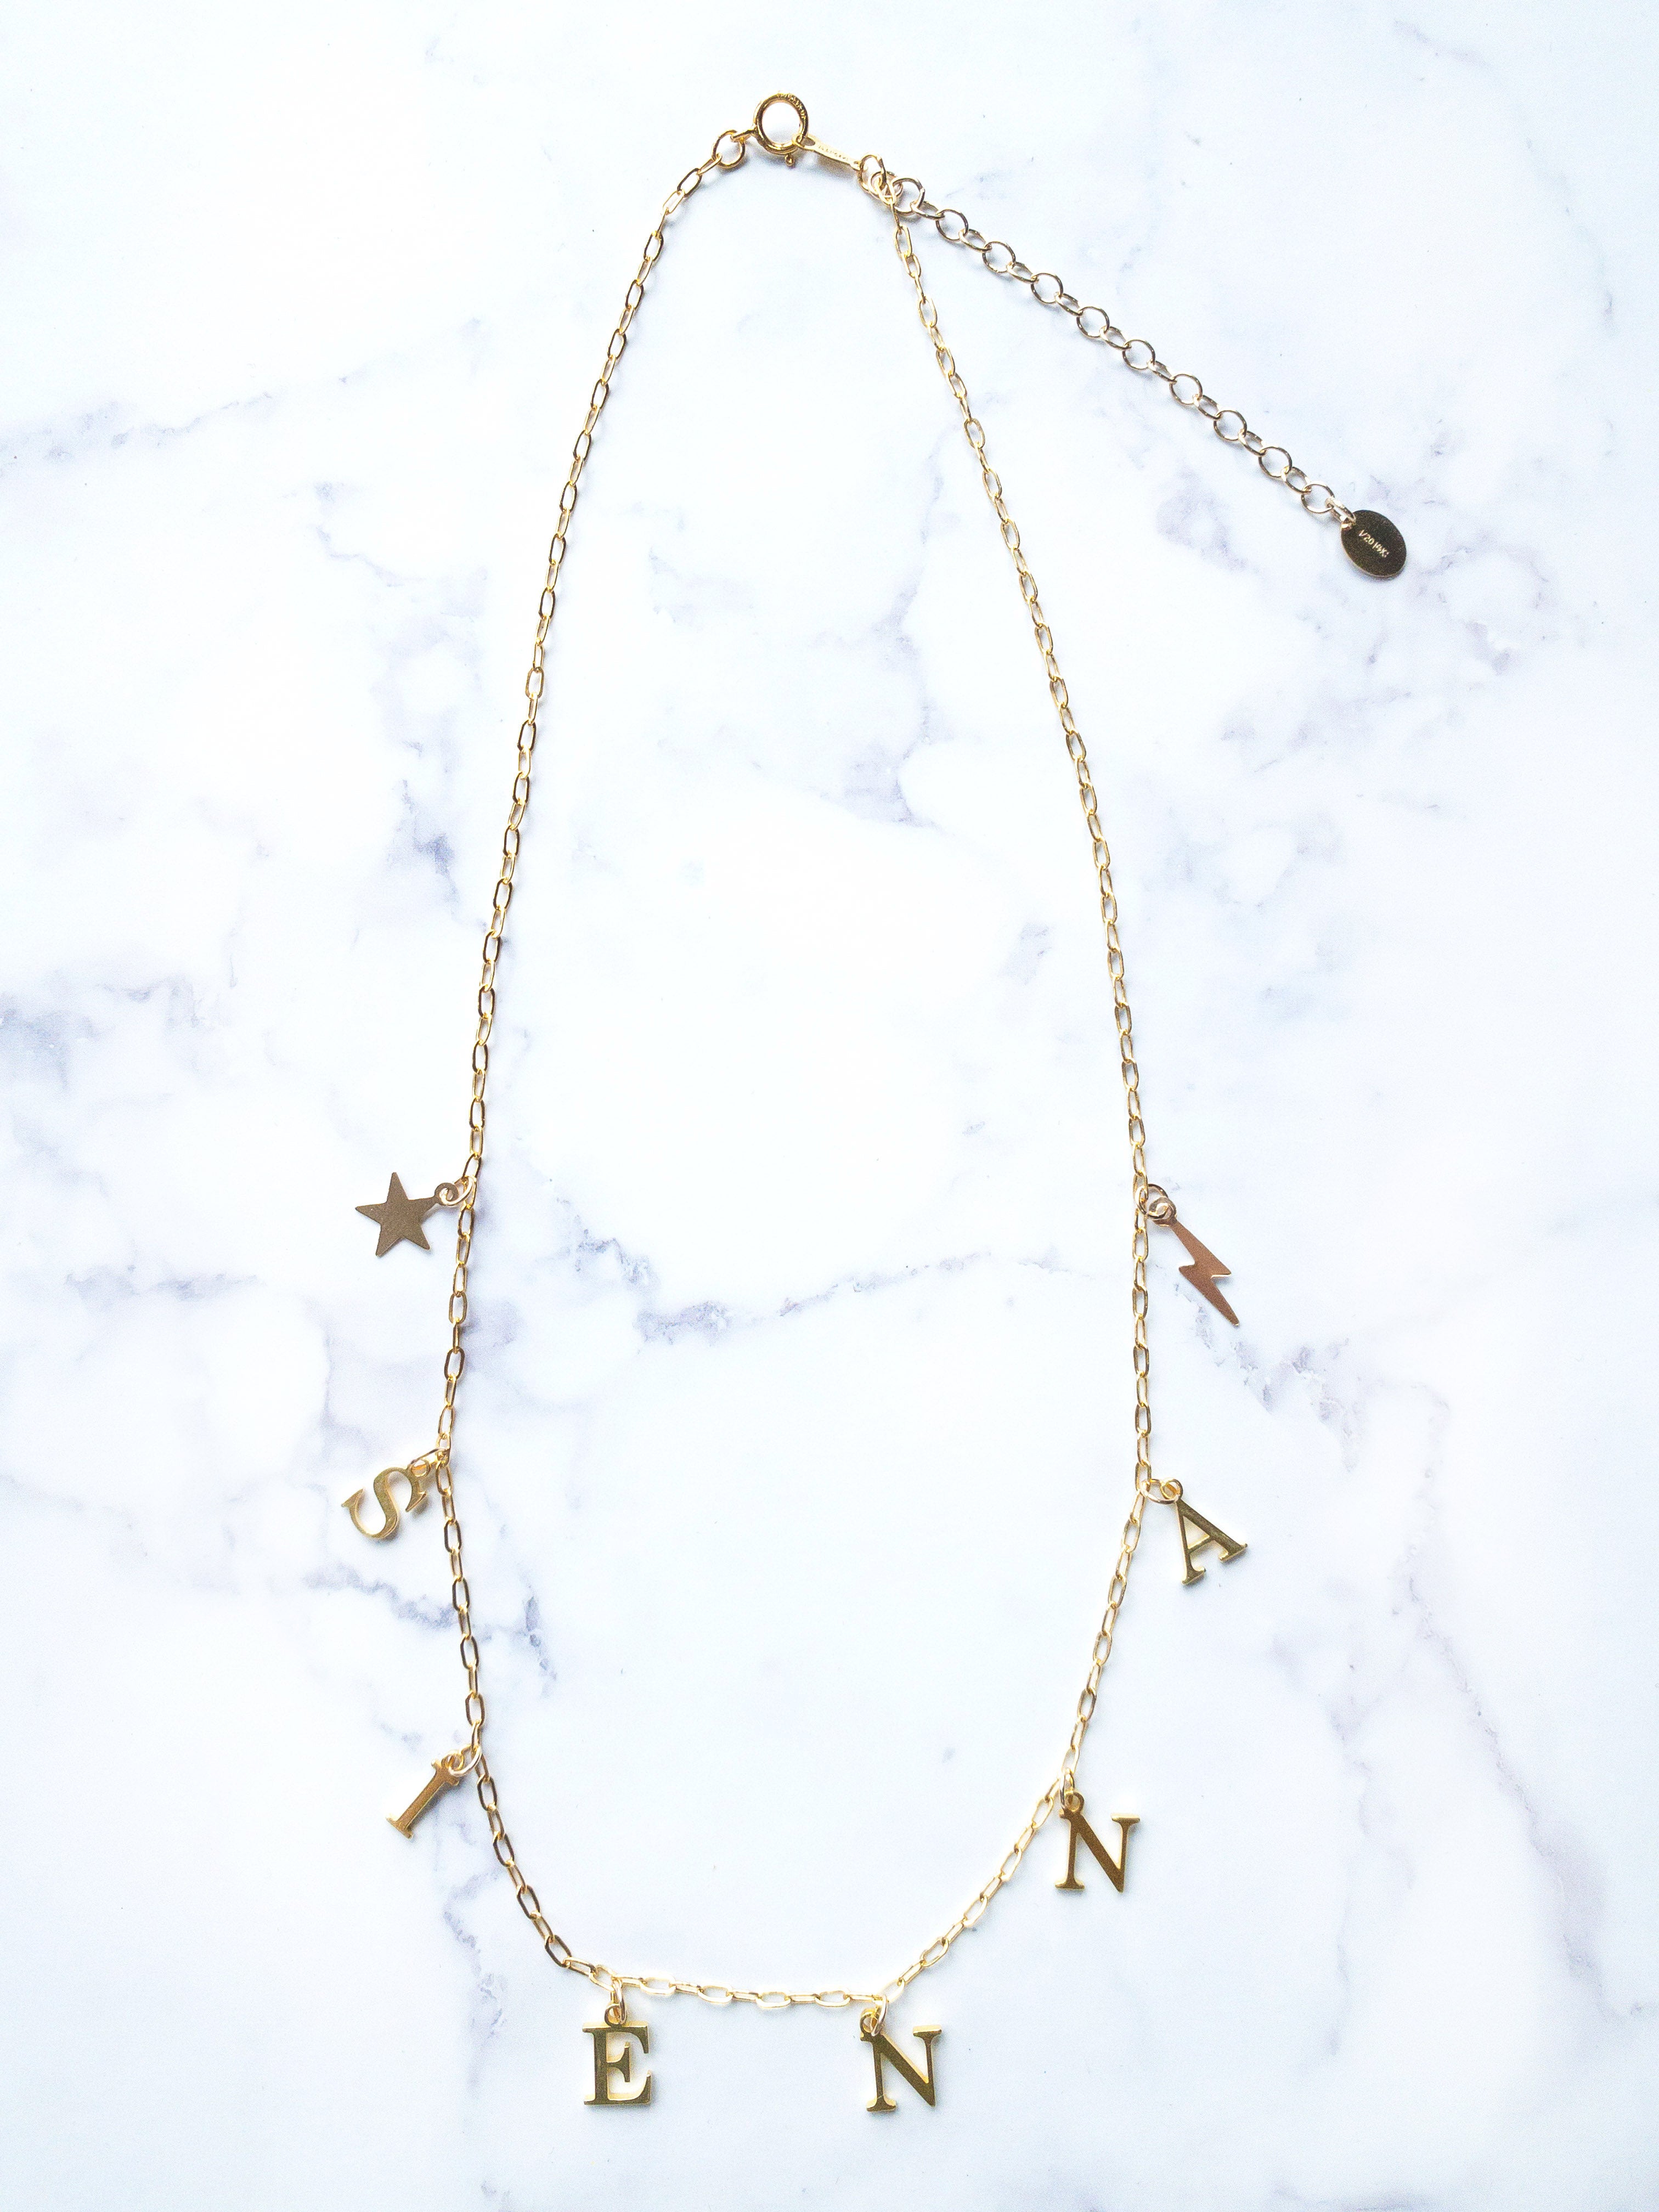 Personalised Gold Charm Necklace with Star and Bolt Charms